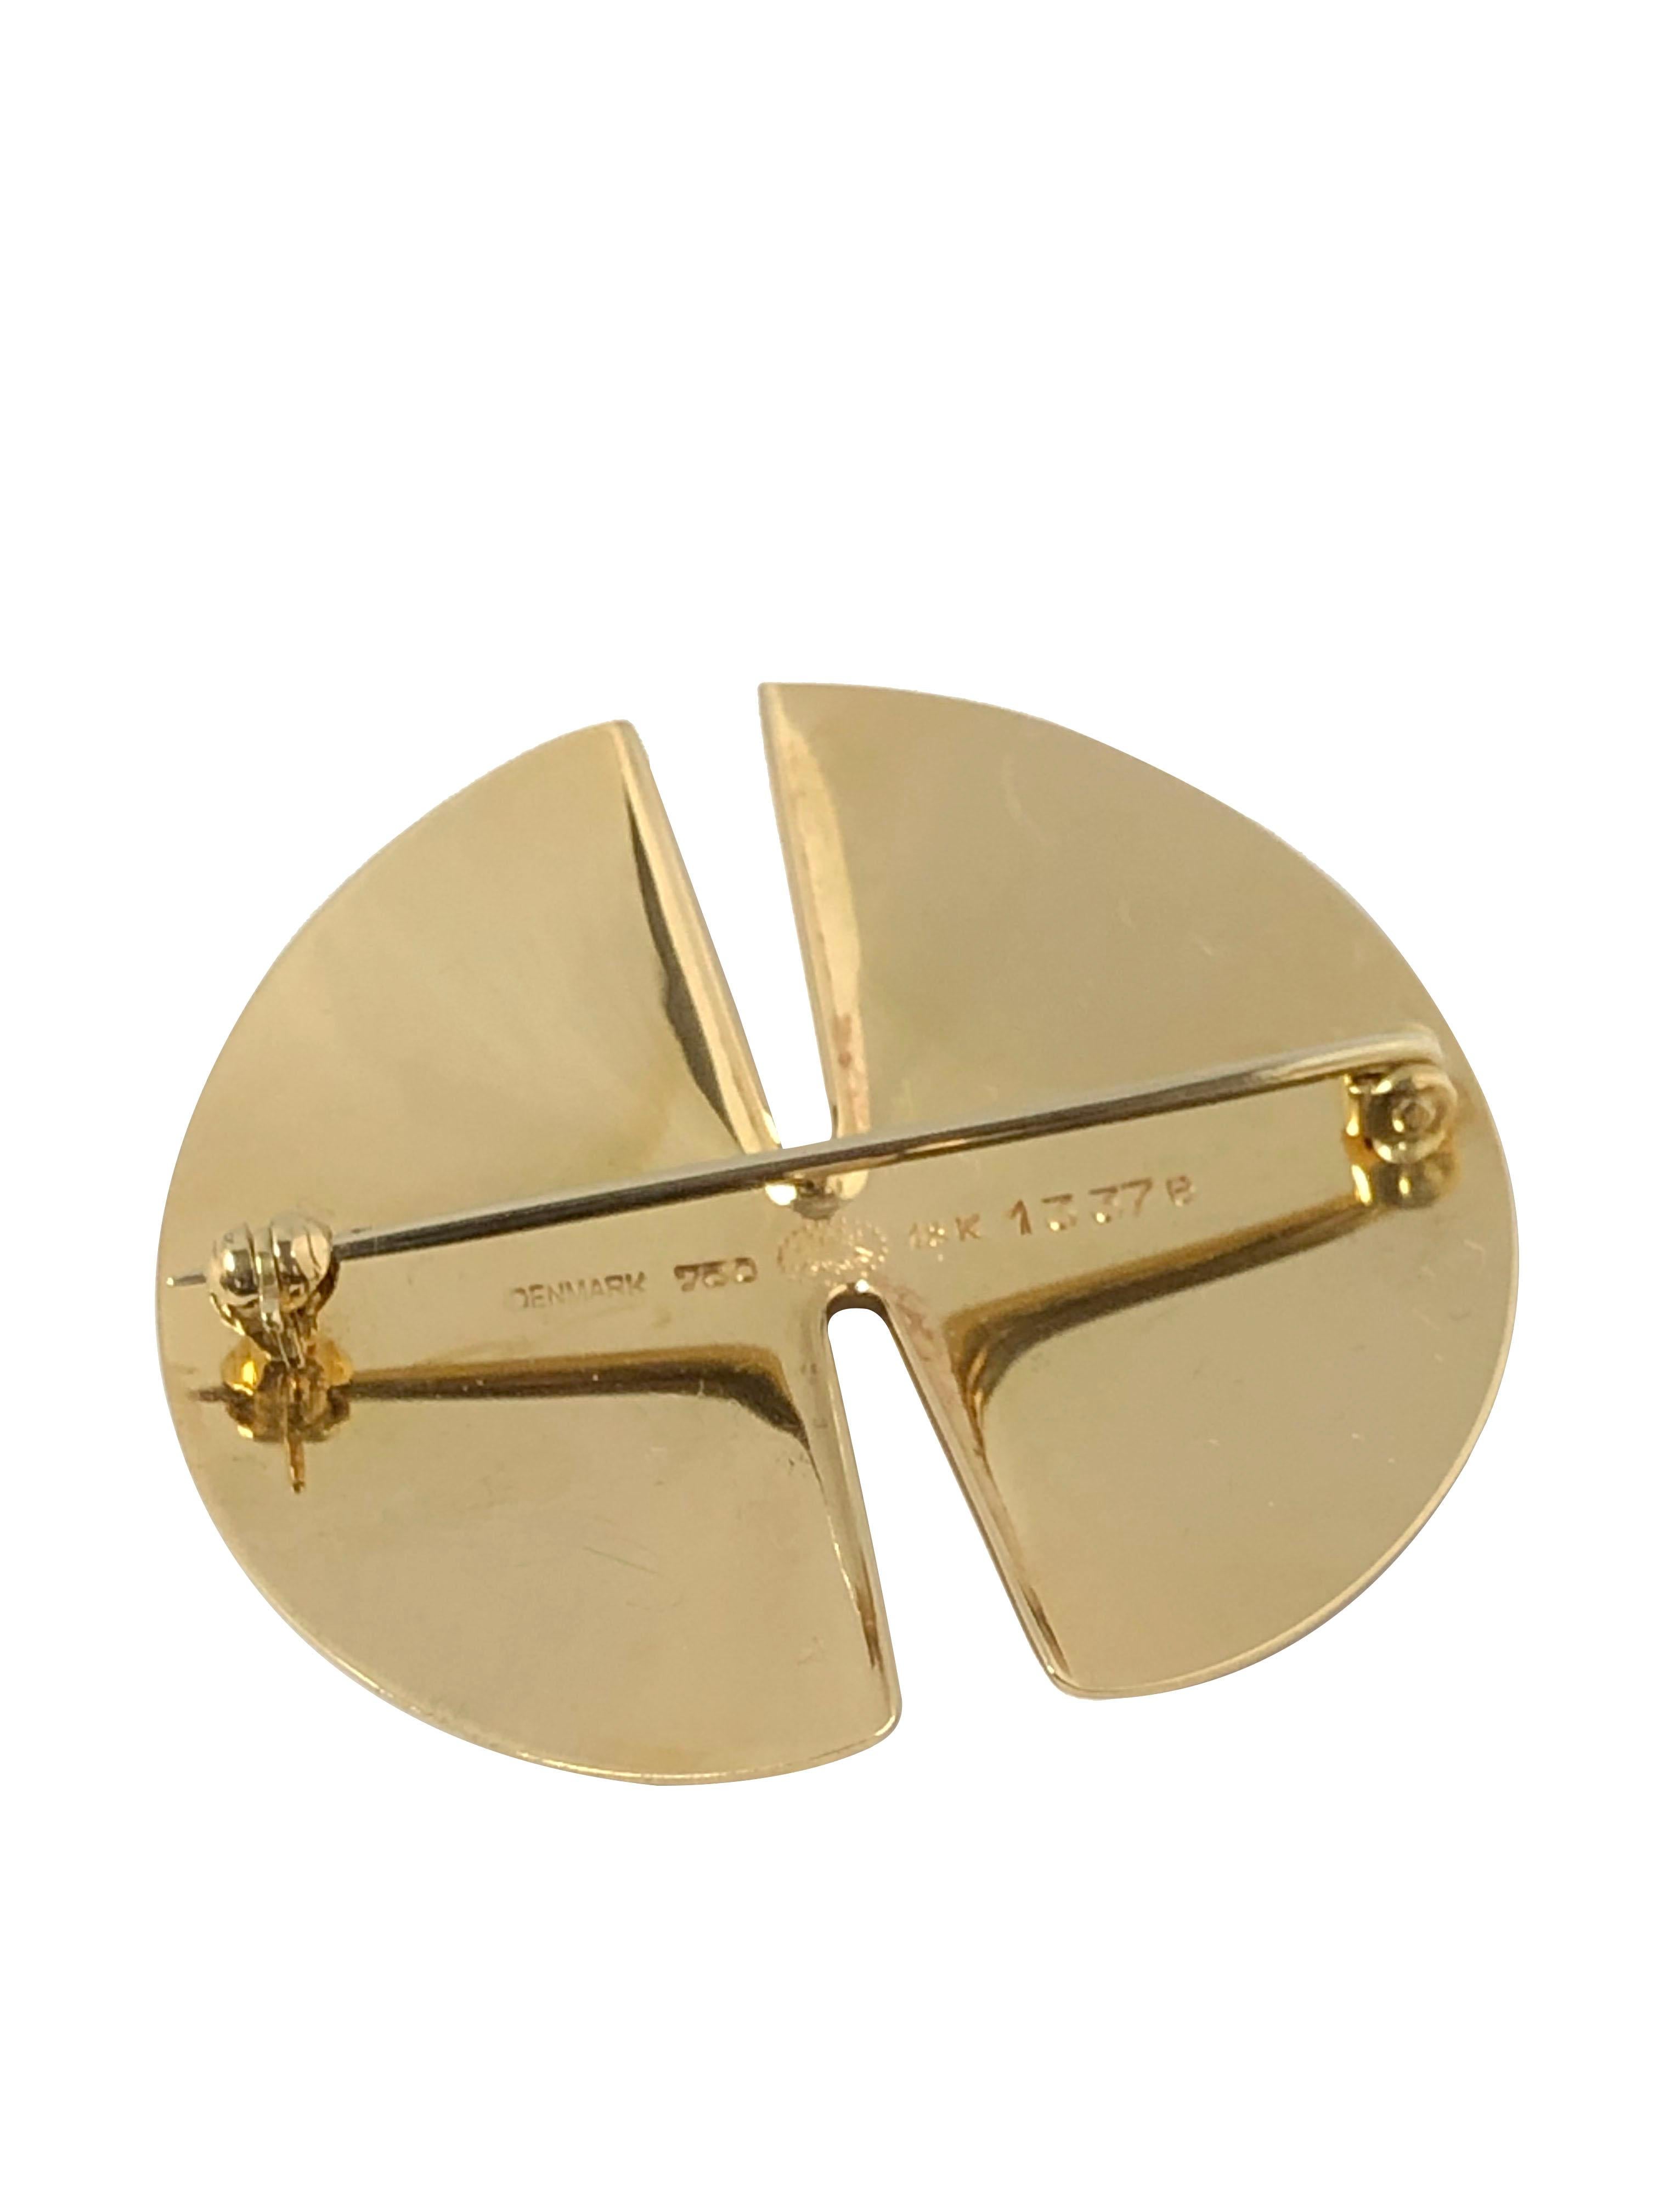 Georg Jensen Yellow Gold Modernist Brooch by Nana Ditzel In Excellent Condition For Sale In Chicago, IL